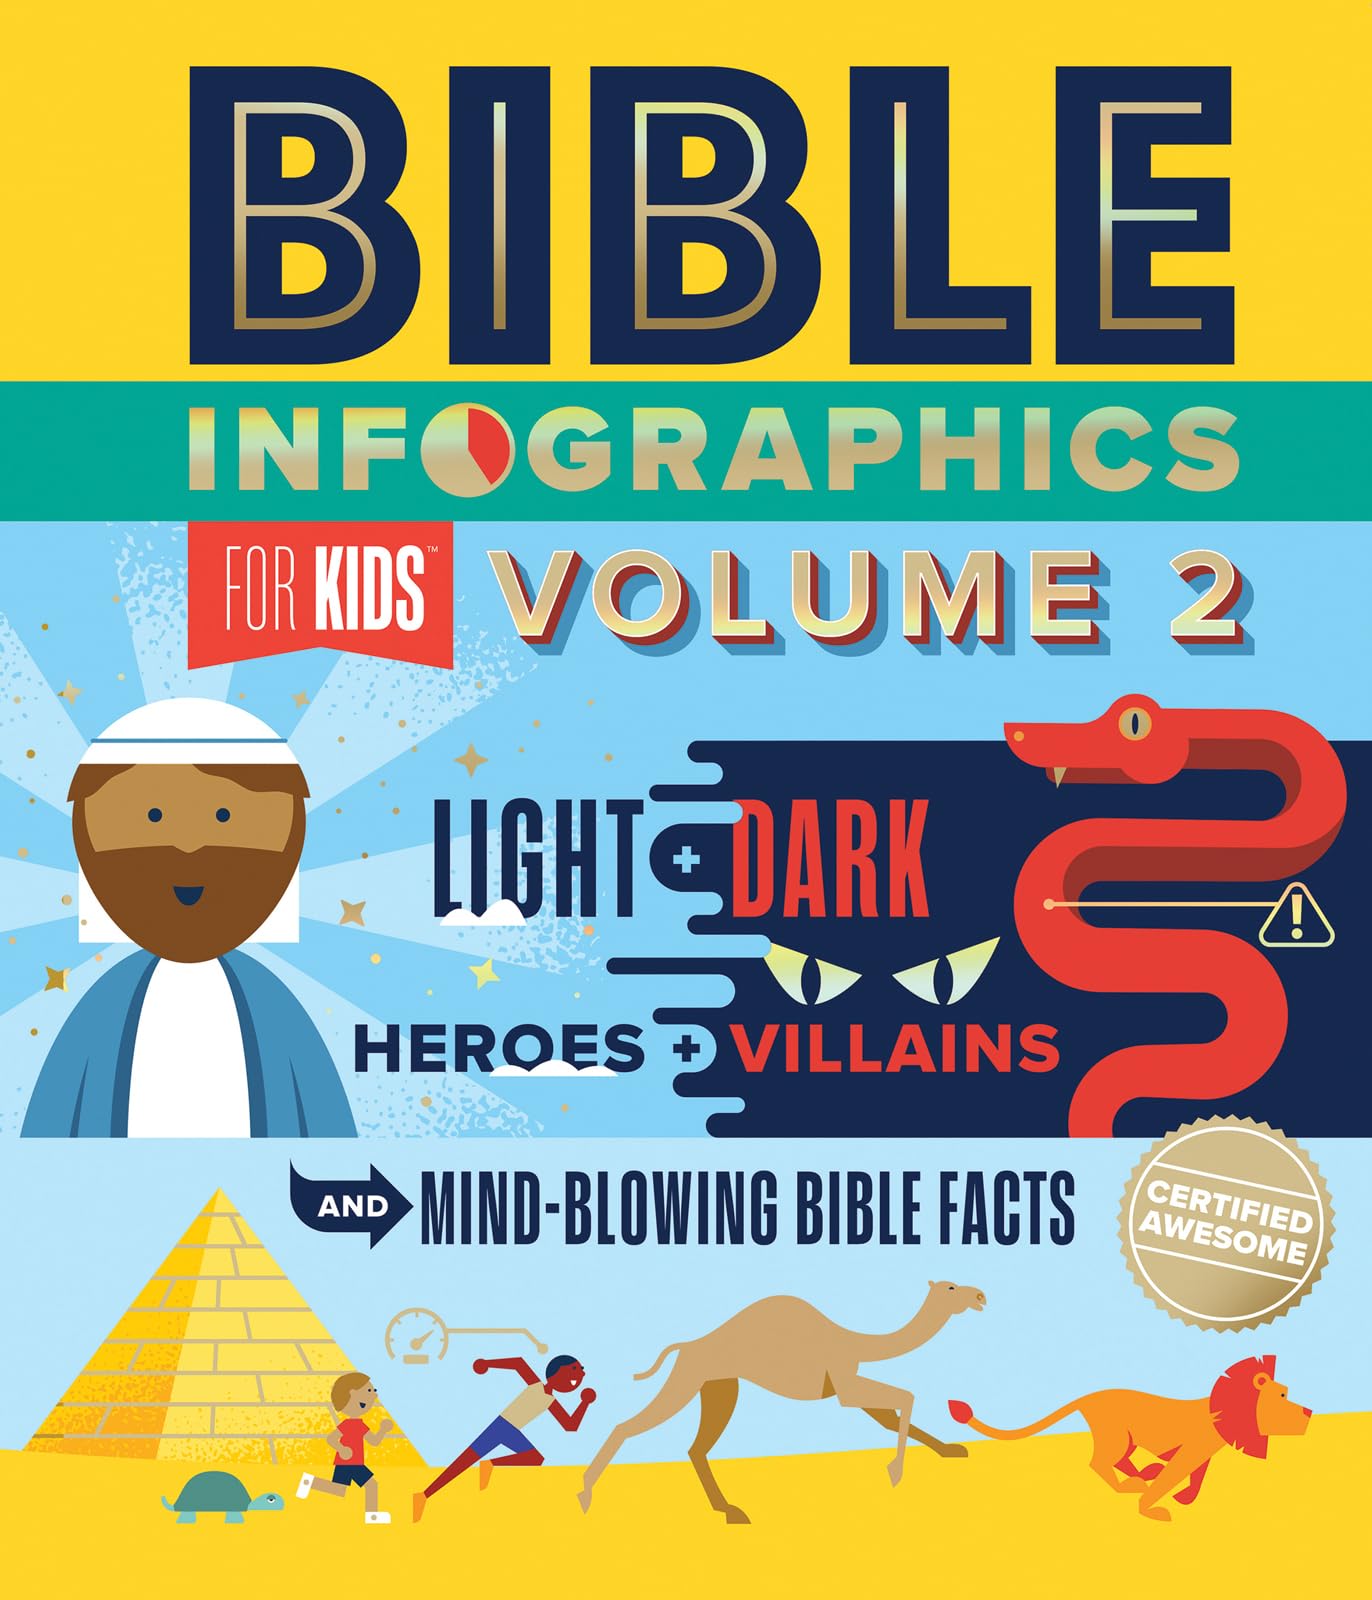 Bible Infographics for Kids Volume 2: Light and Dark, Heroes and Villains, and Mind-Blowing Bible Facts by Harvest House Publishers